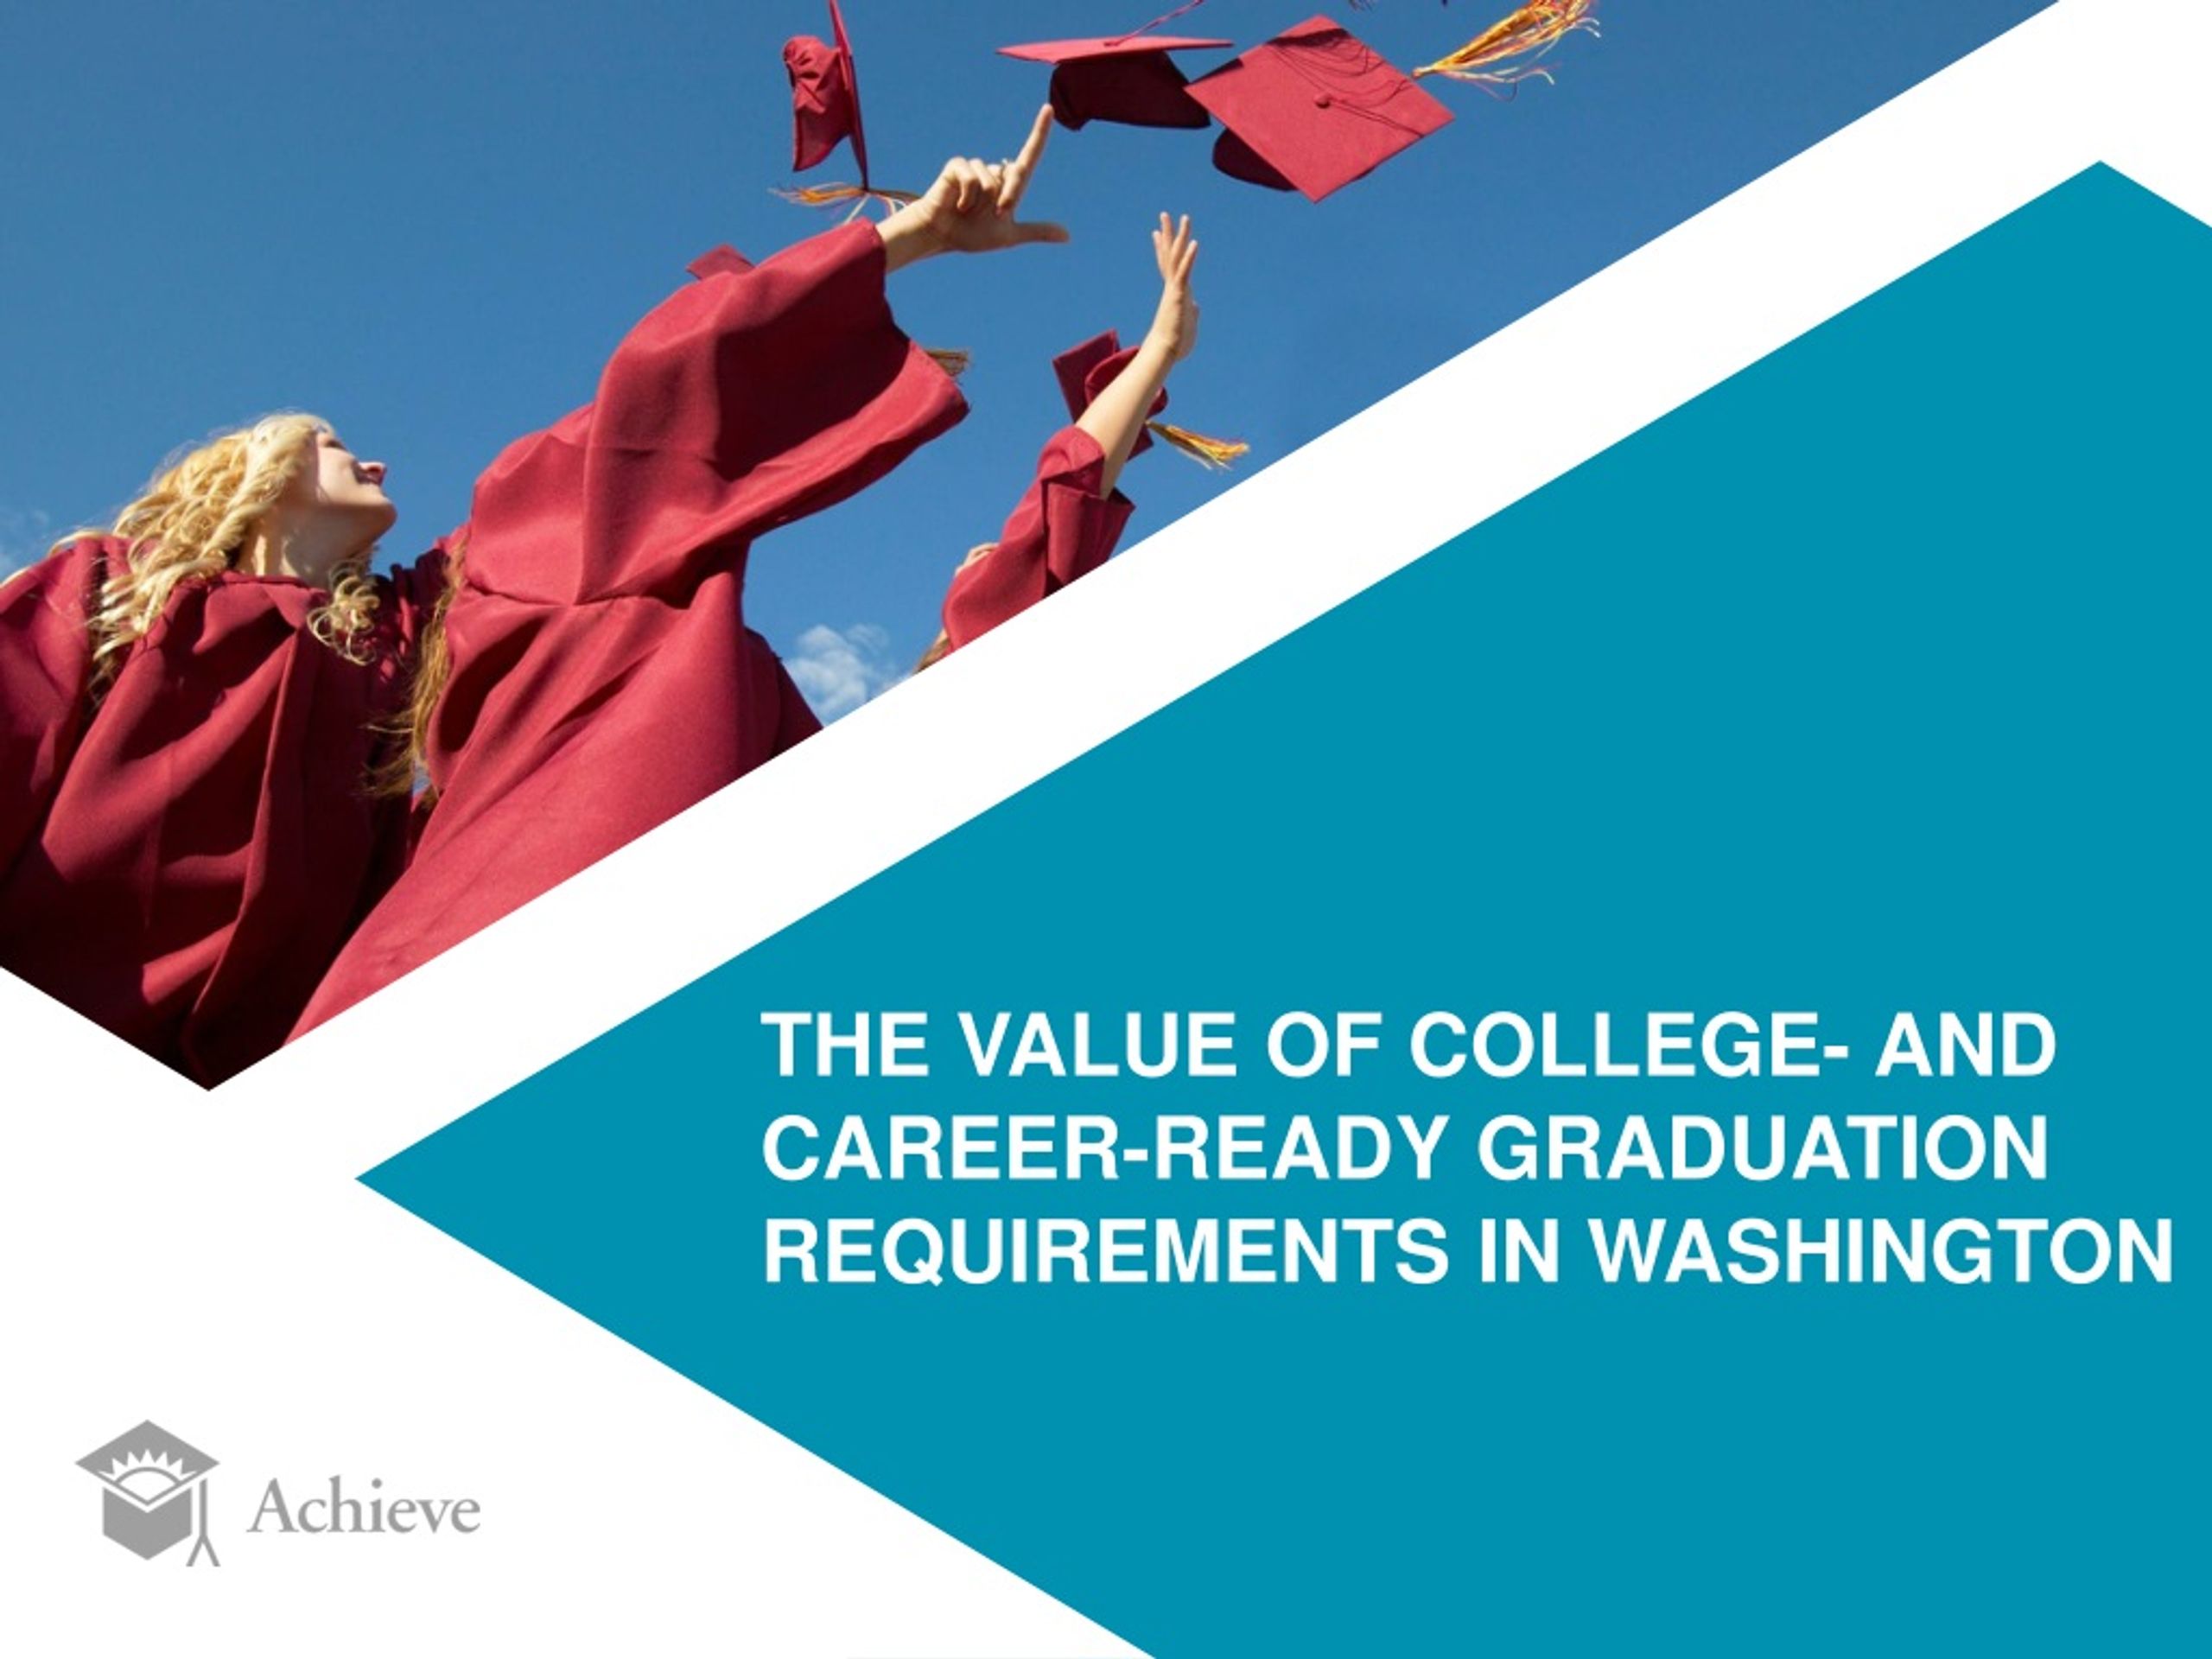 PPT THE VALUE OF COLLEGE AND CAREERREADY GRADUATION REQUIREMENTS IN